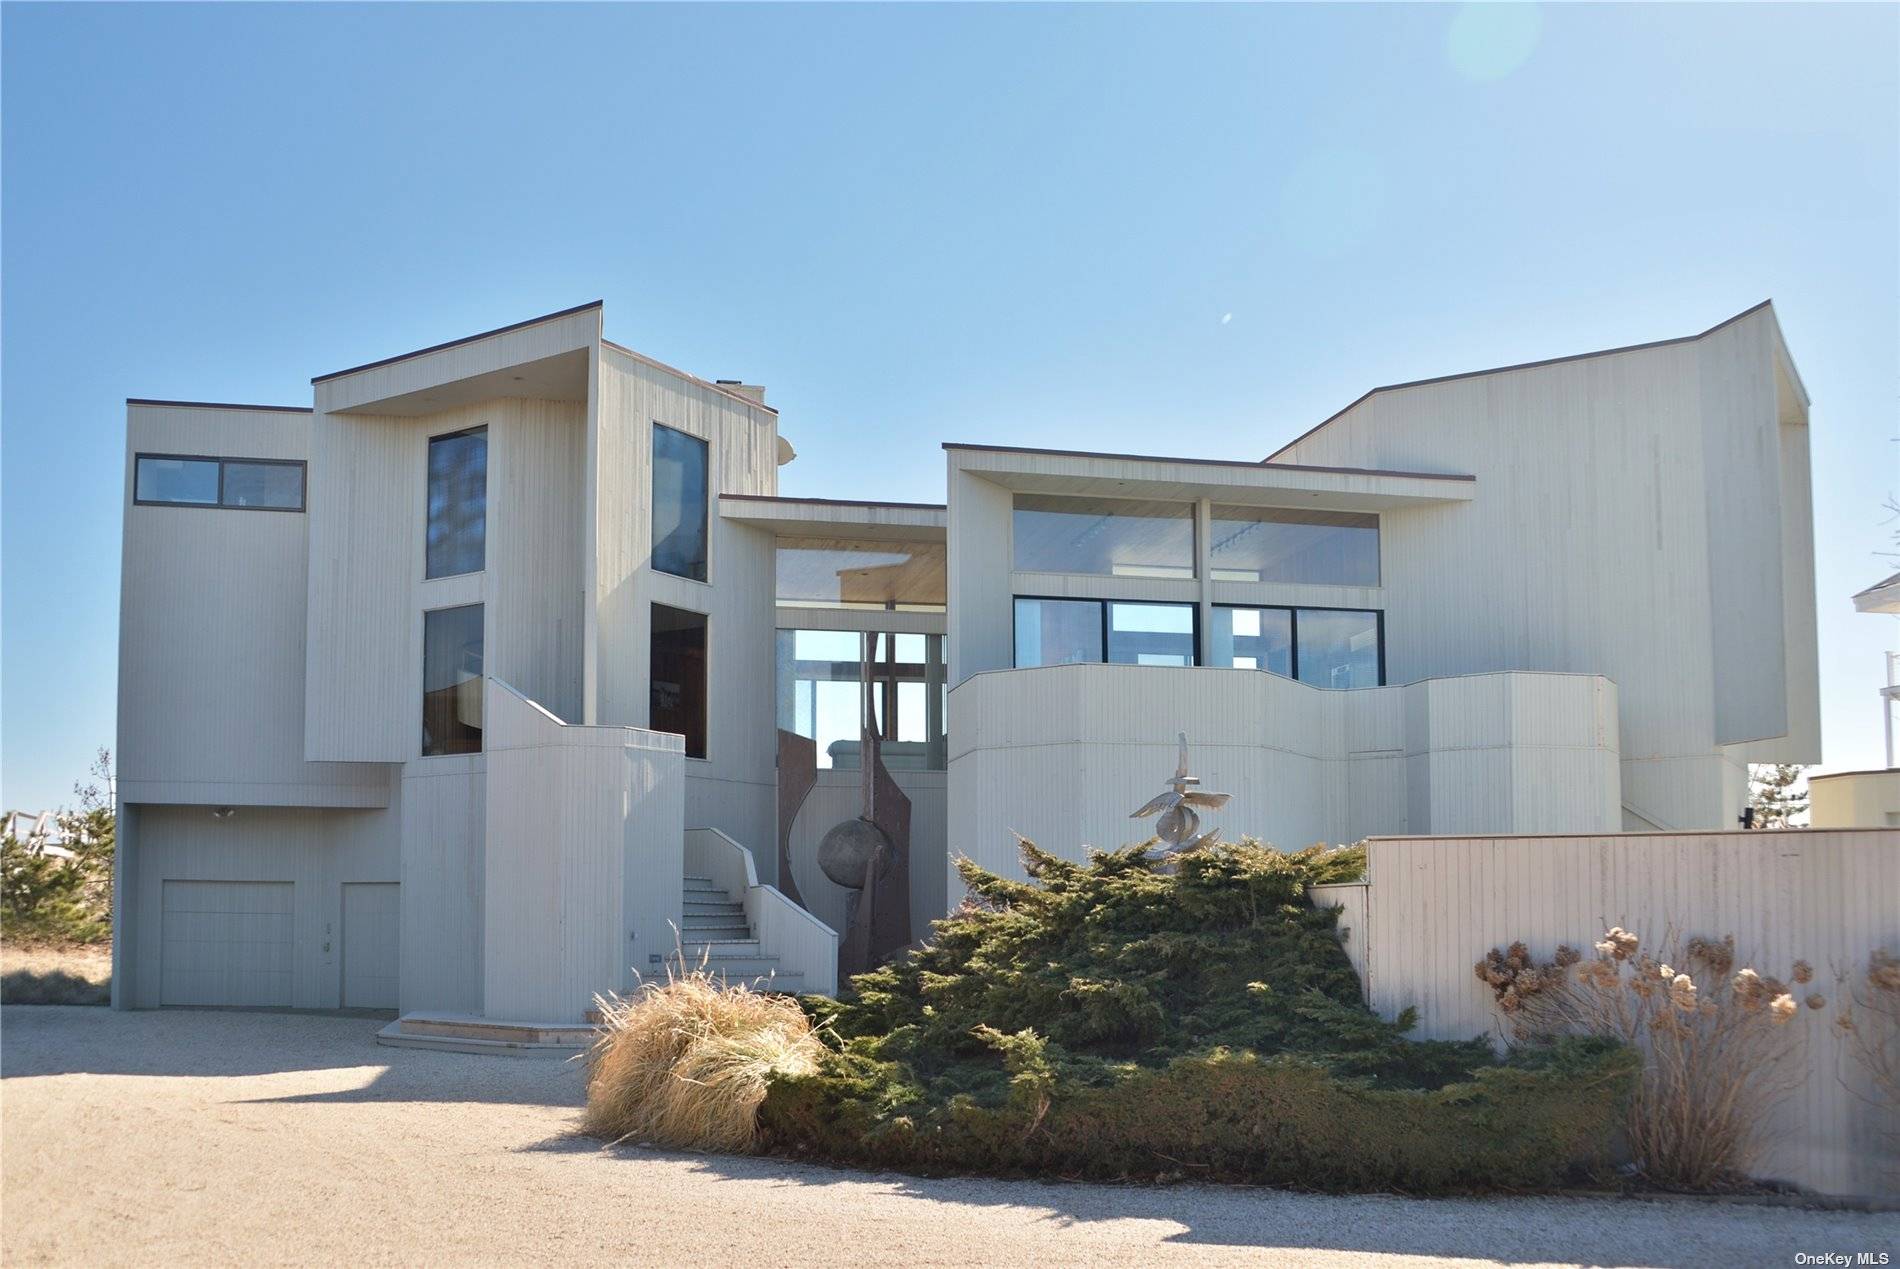 Residing between the bridges and on one of the best ocean front parcels on Dune Road this home boasts incredible ocean views and is jetty protected.